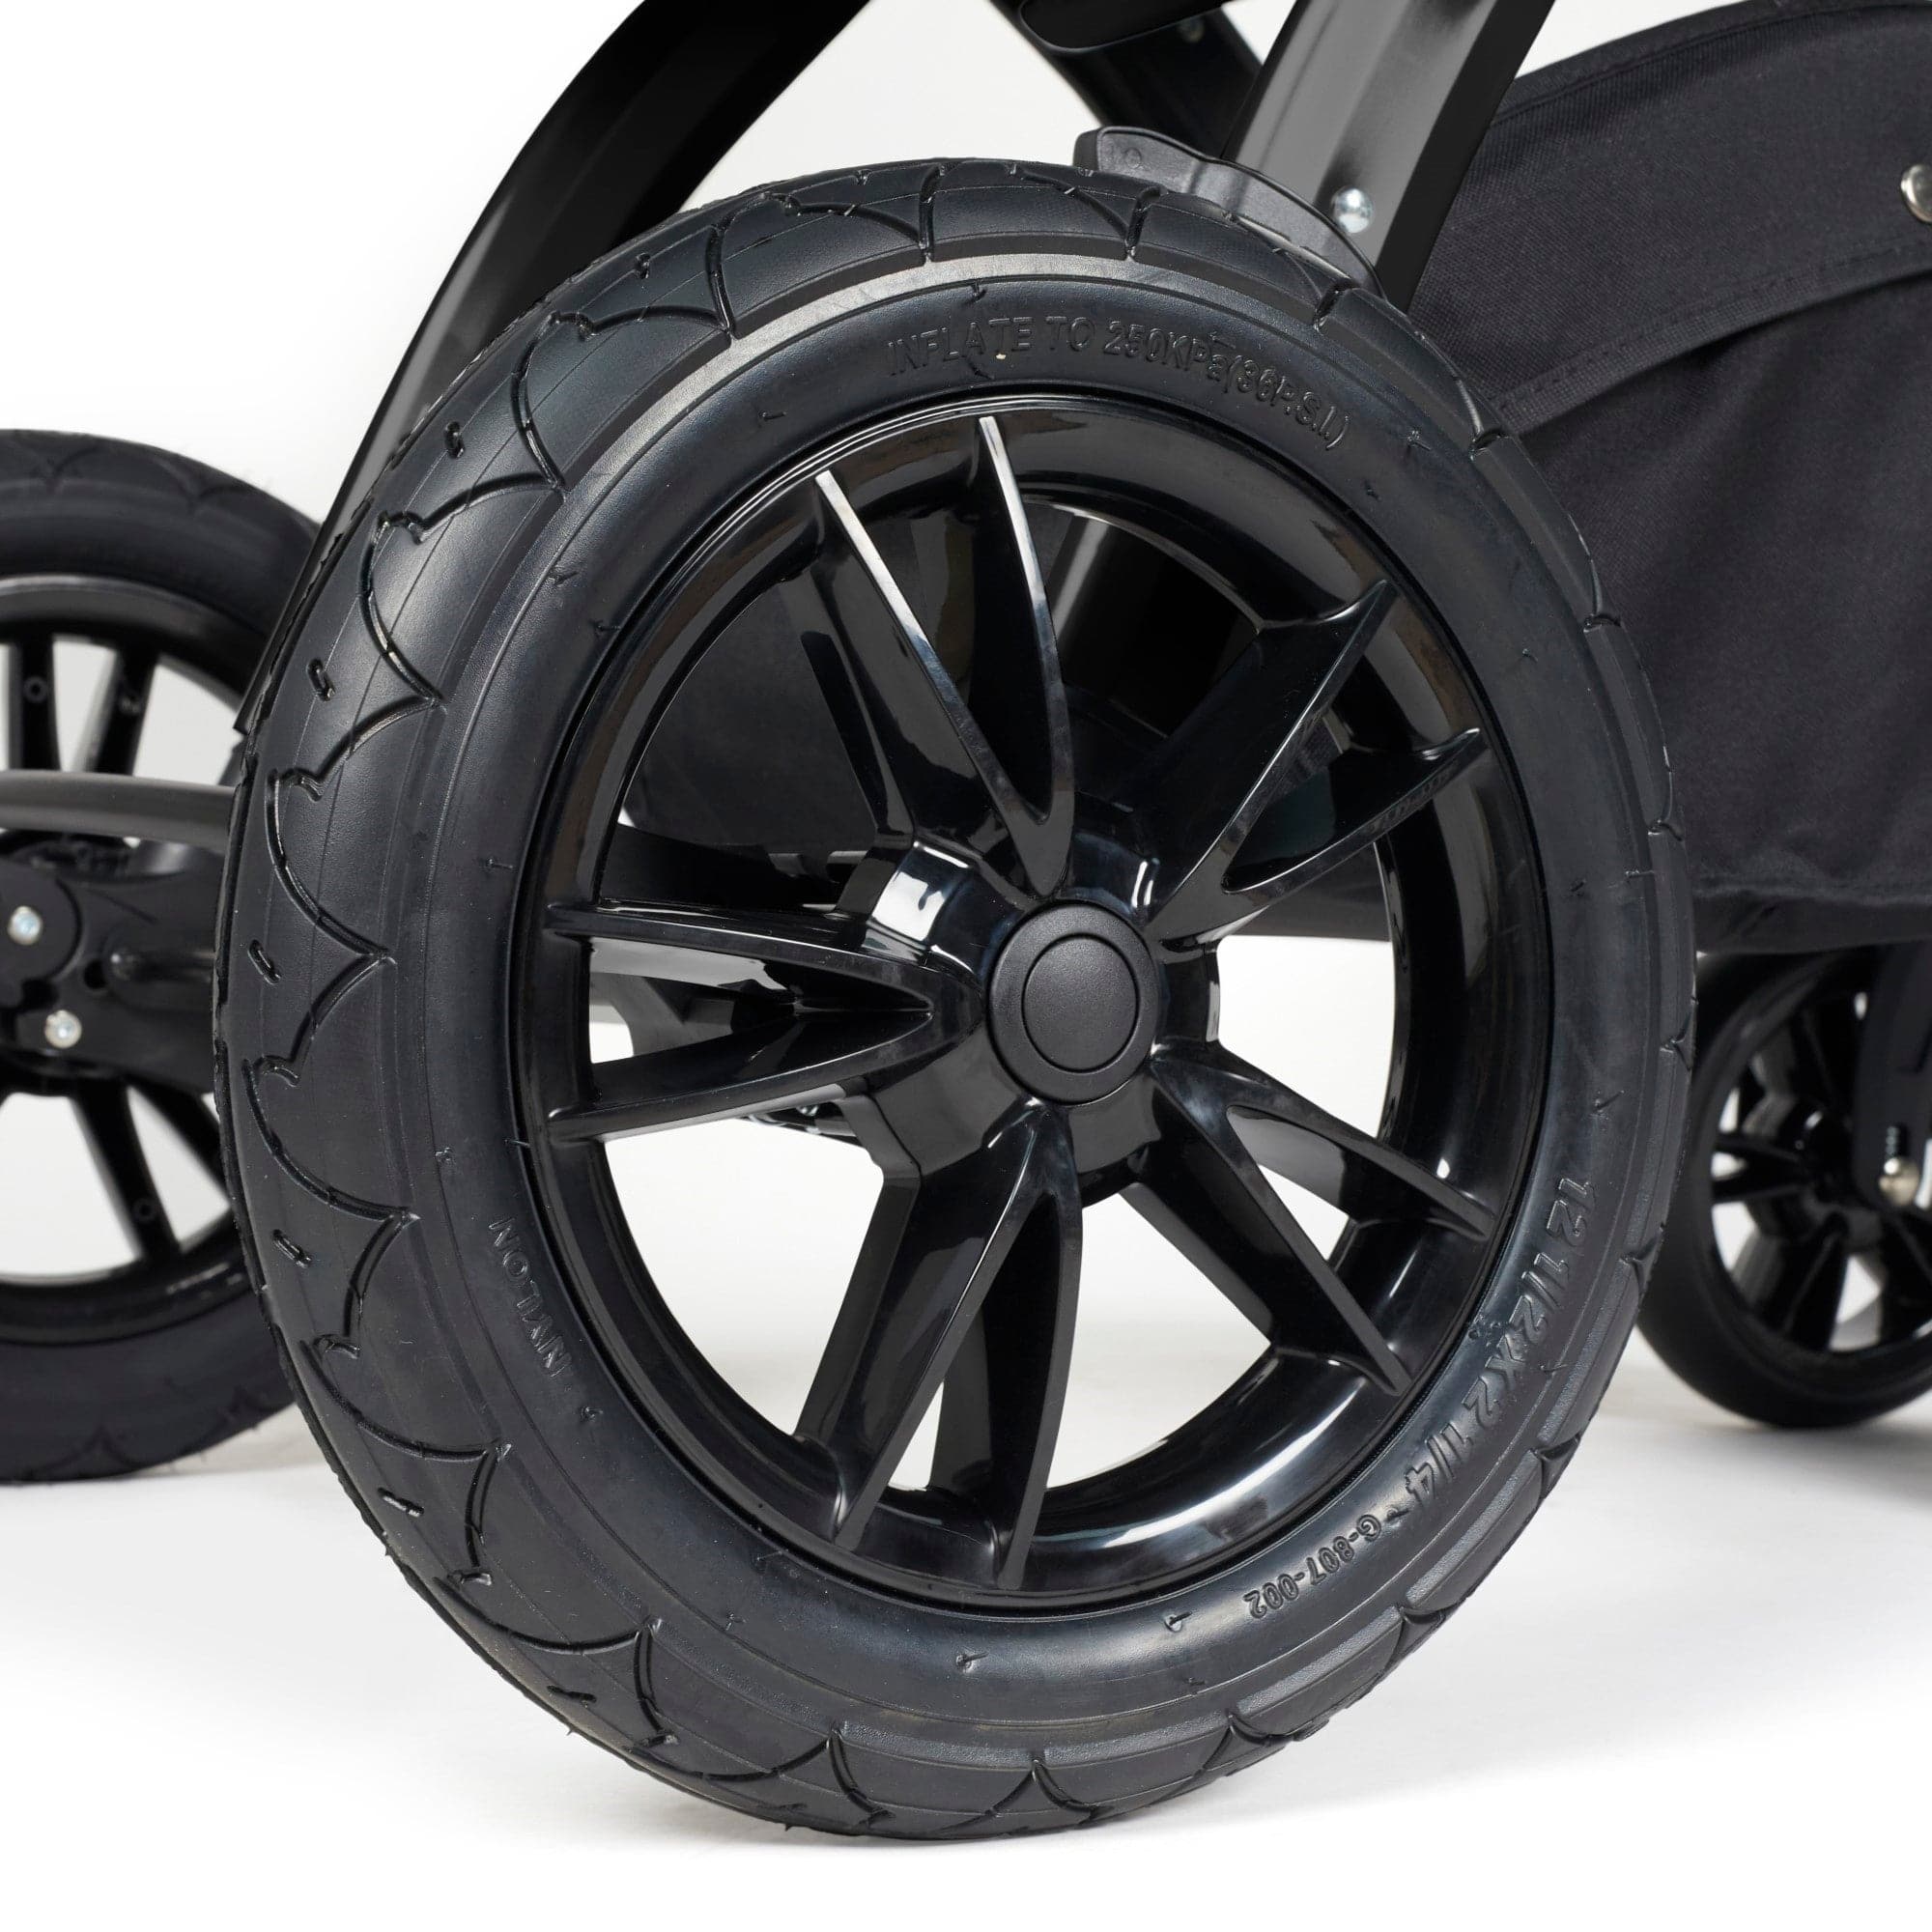 Ickle Bubba Stomp Luxe All-In-One I-Size Travel System - Black / Midnight / Black -  | For Your Little One